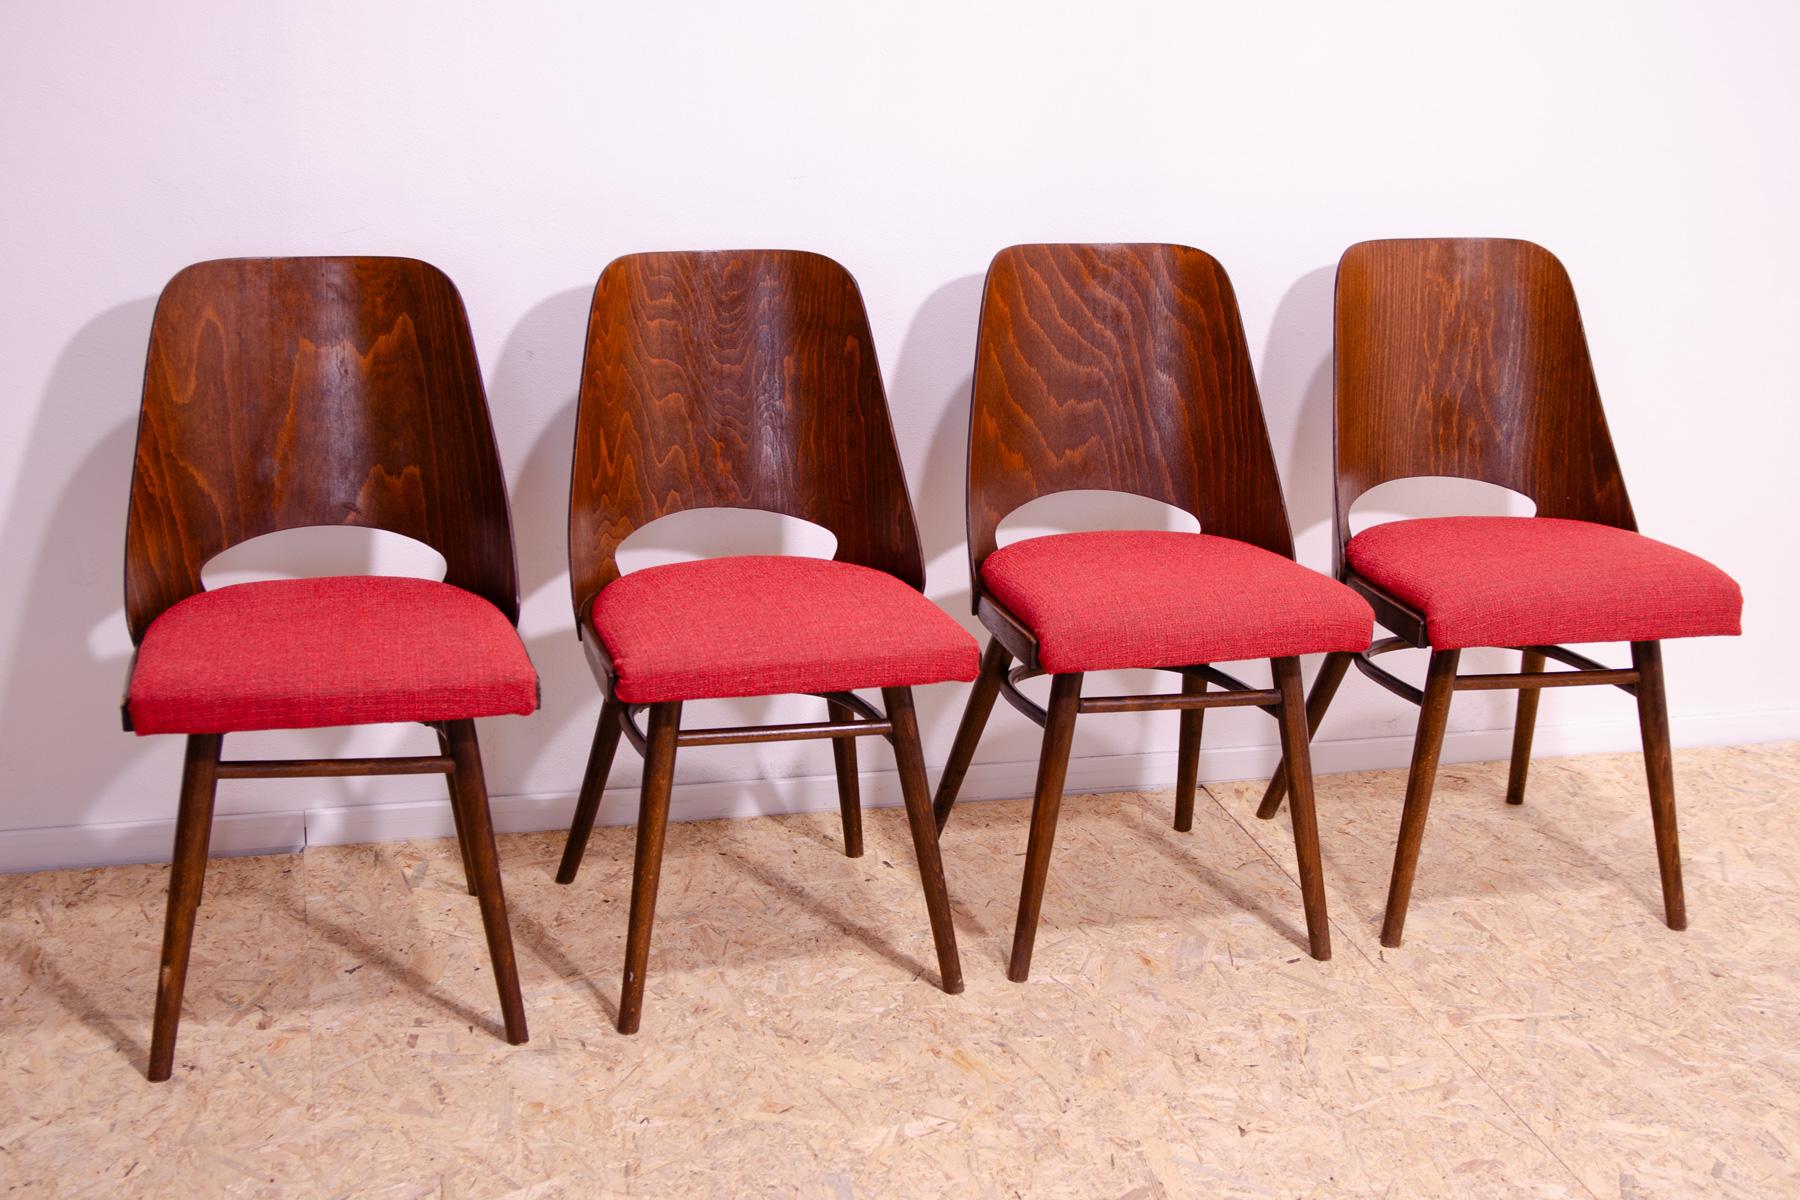 An interesting model of mid century bentwood dining chairs. Designed by Radomír Hofman for TON Bystřice pod Hostýnem (Thonet successor in Czechoslovakia after World War 2) . They were made in the former Czechoslovakia in the 1960´s. The chairs are